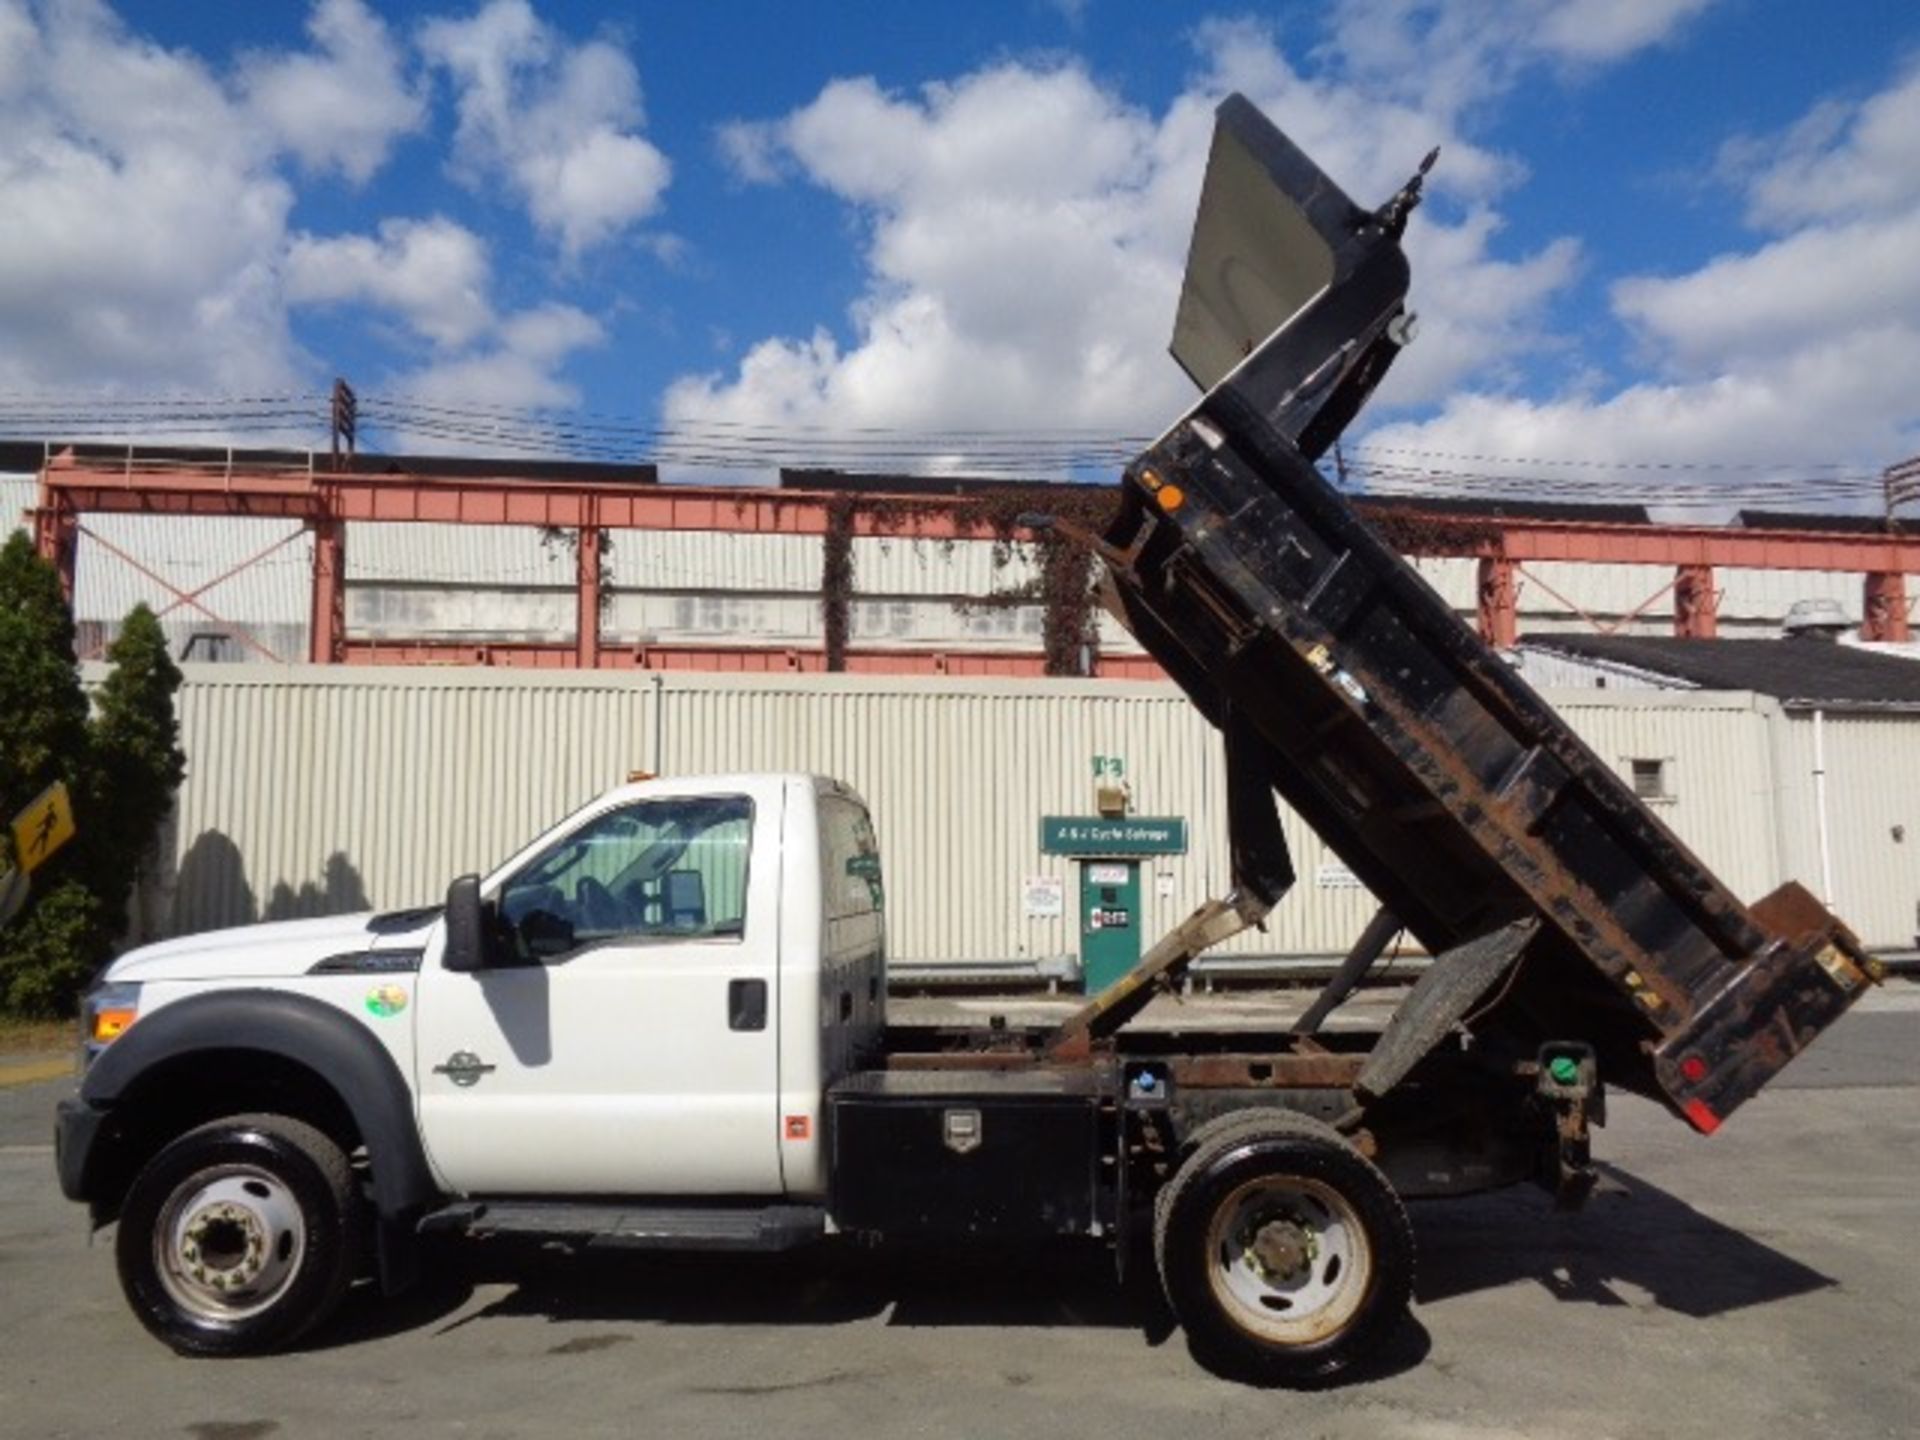 2012 Ford F550 Dump Truck - Image 13 of 19